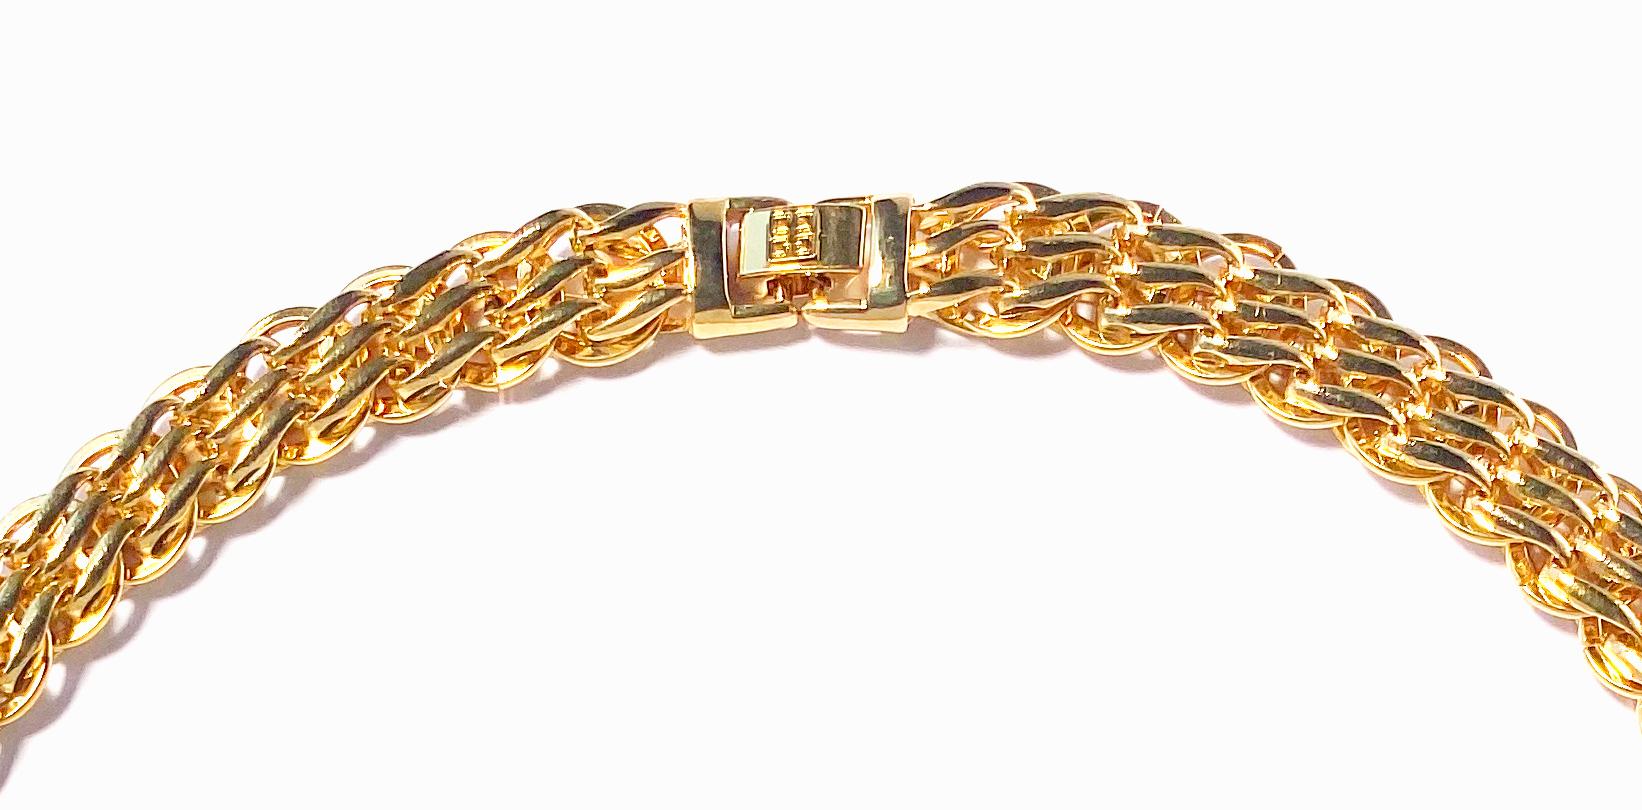 Vintage 1980s Givenchy chain necklace in gold plate.  This short length heritage necklace comprises a flat, wide triple-linked chain with a Givenchy logo clasp.  Length 18 inches, width just under half an inch with a foldover clasp closure featuring